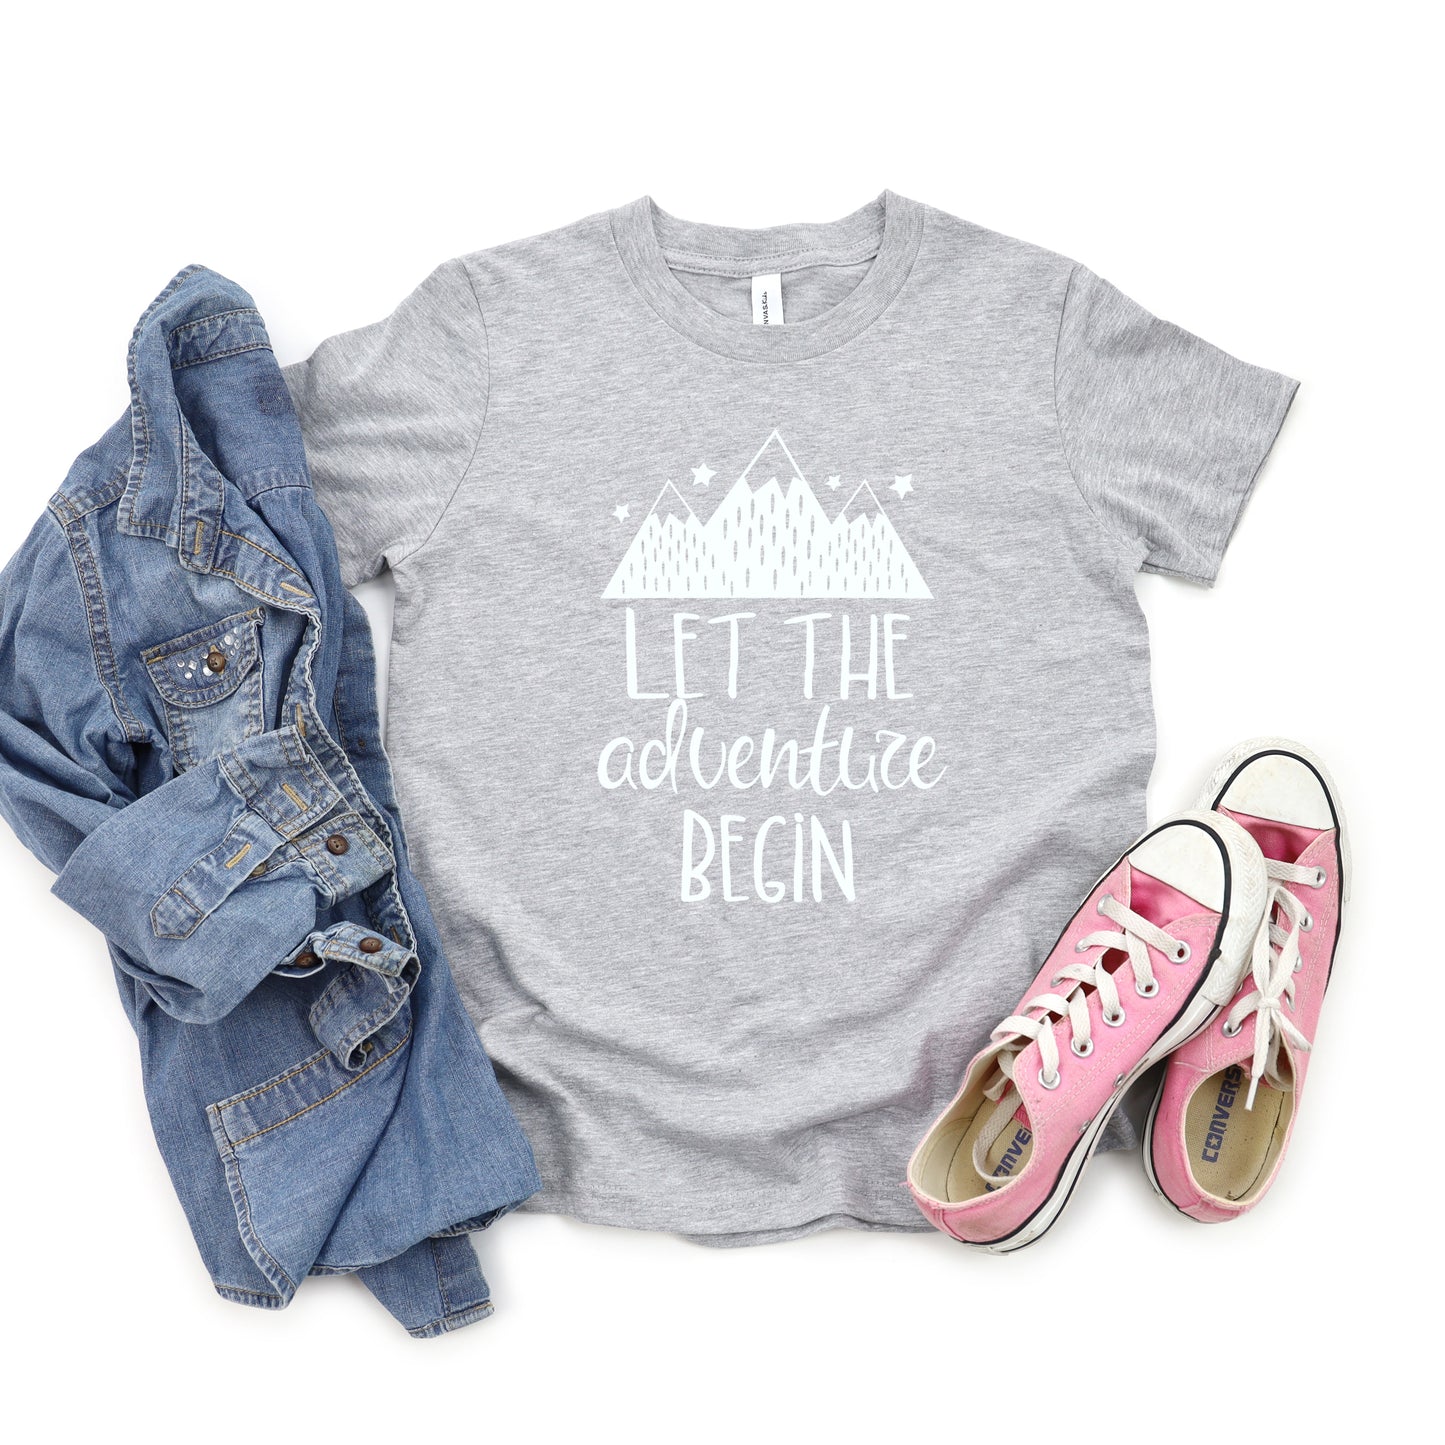 Let The Adventure Begin Mountains | Youth Short Sleeve Crew Neck